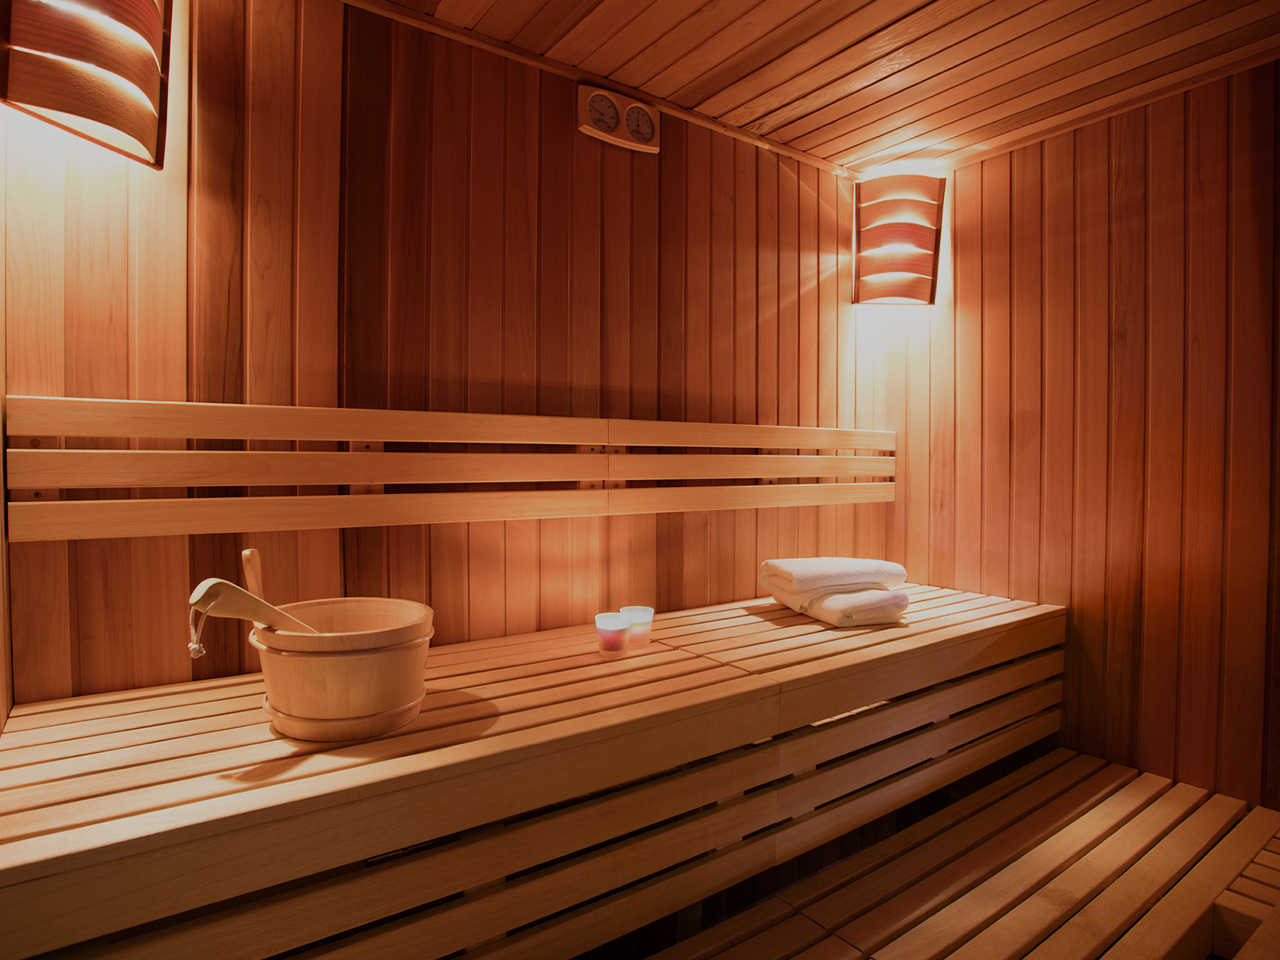 Health Benefits Of Saunas And Steam Rooms